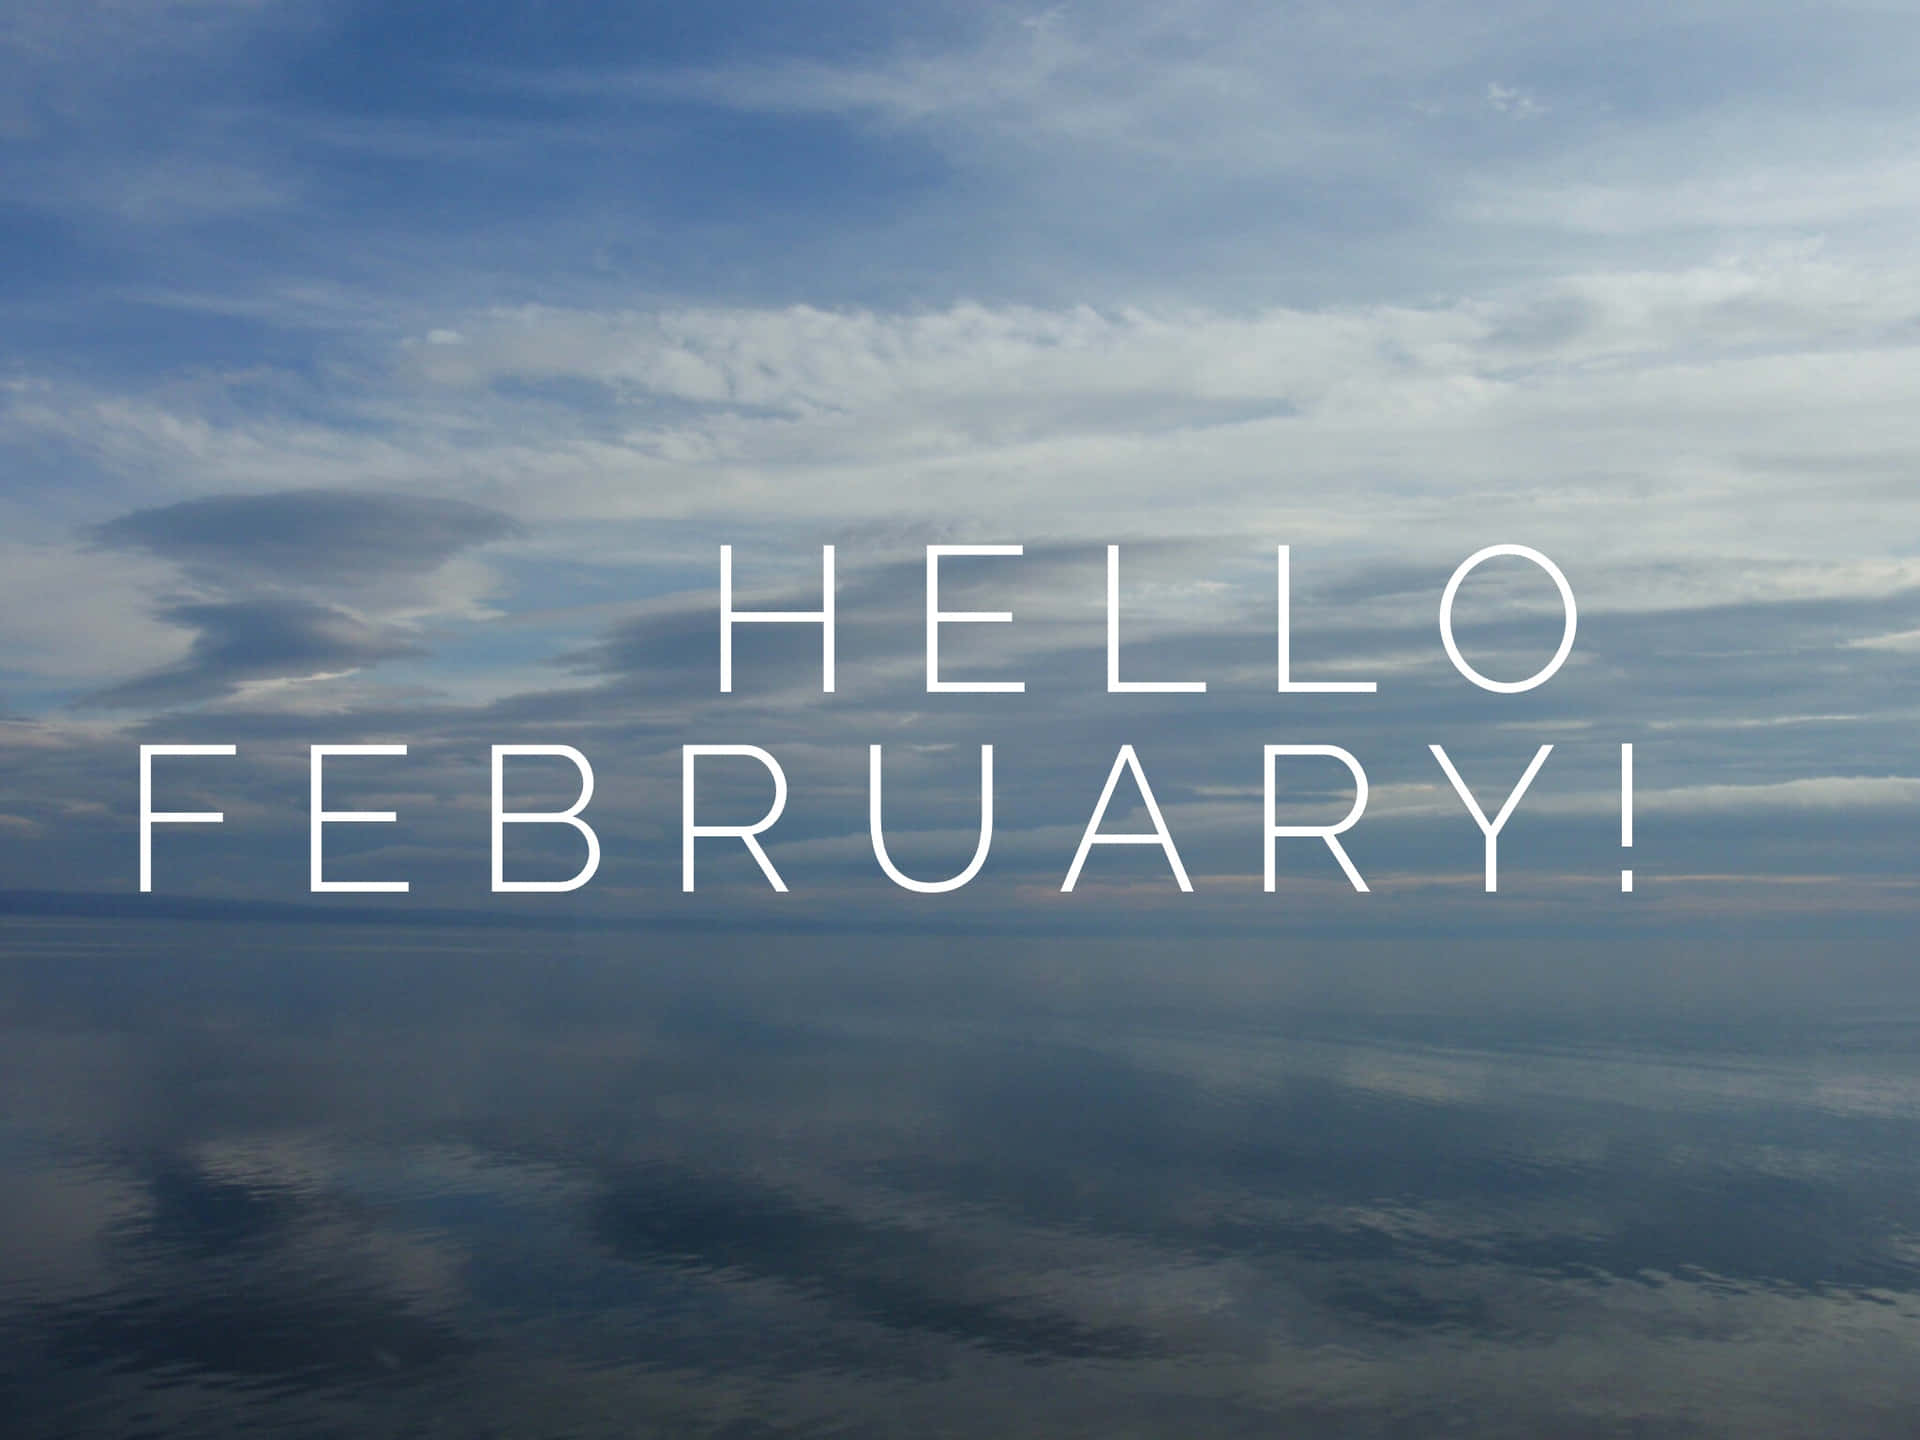 "Welcome February!" Wallpaper